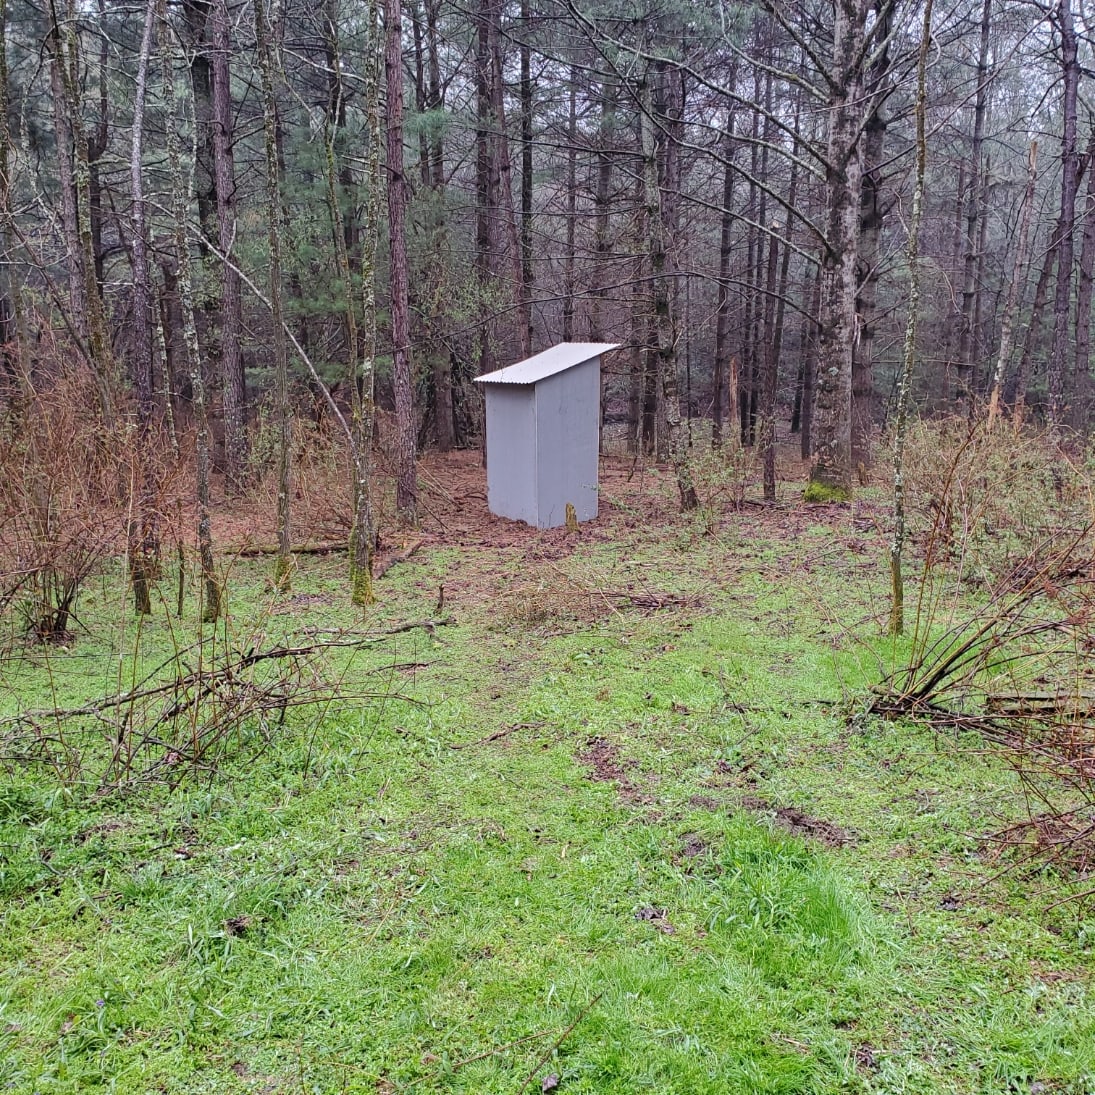 View of the outhouse from the camp area.